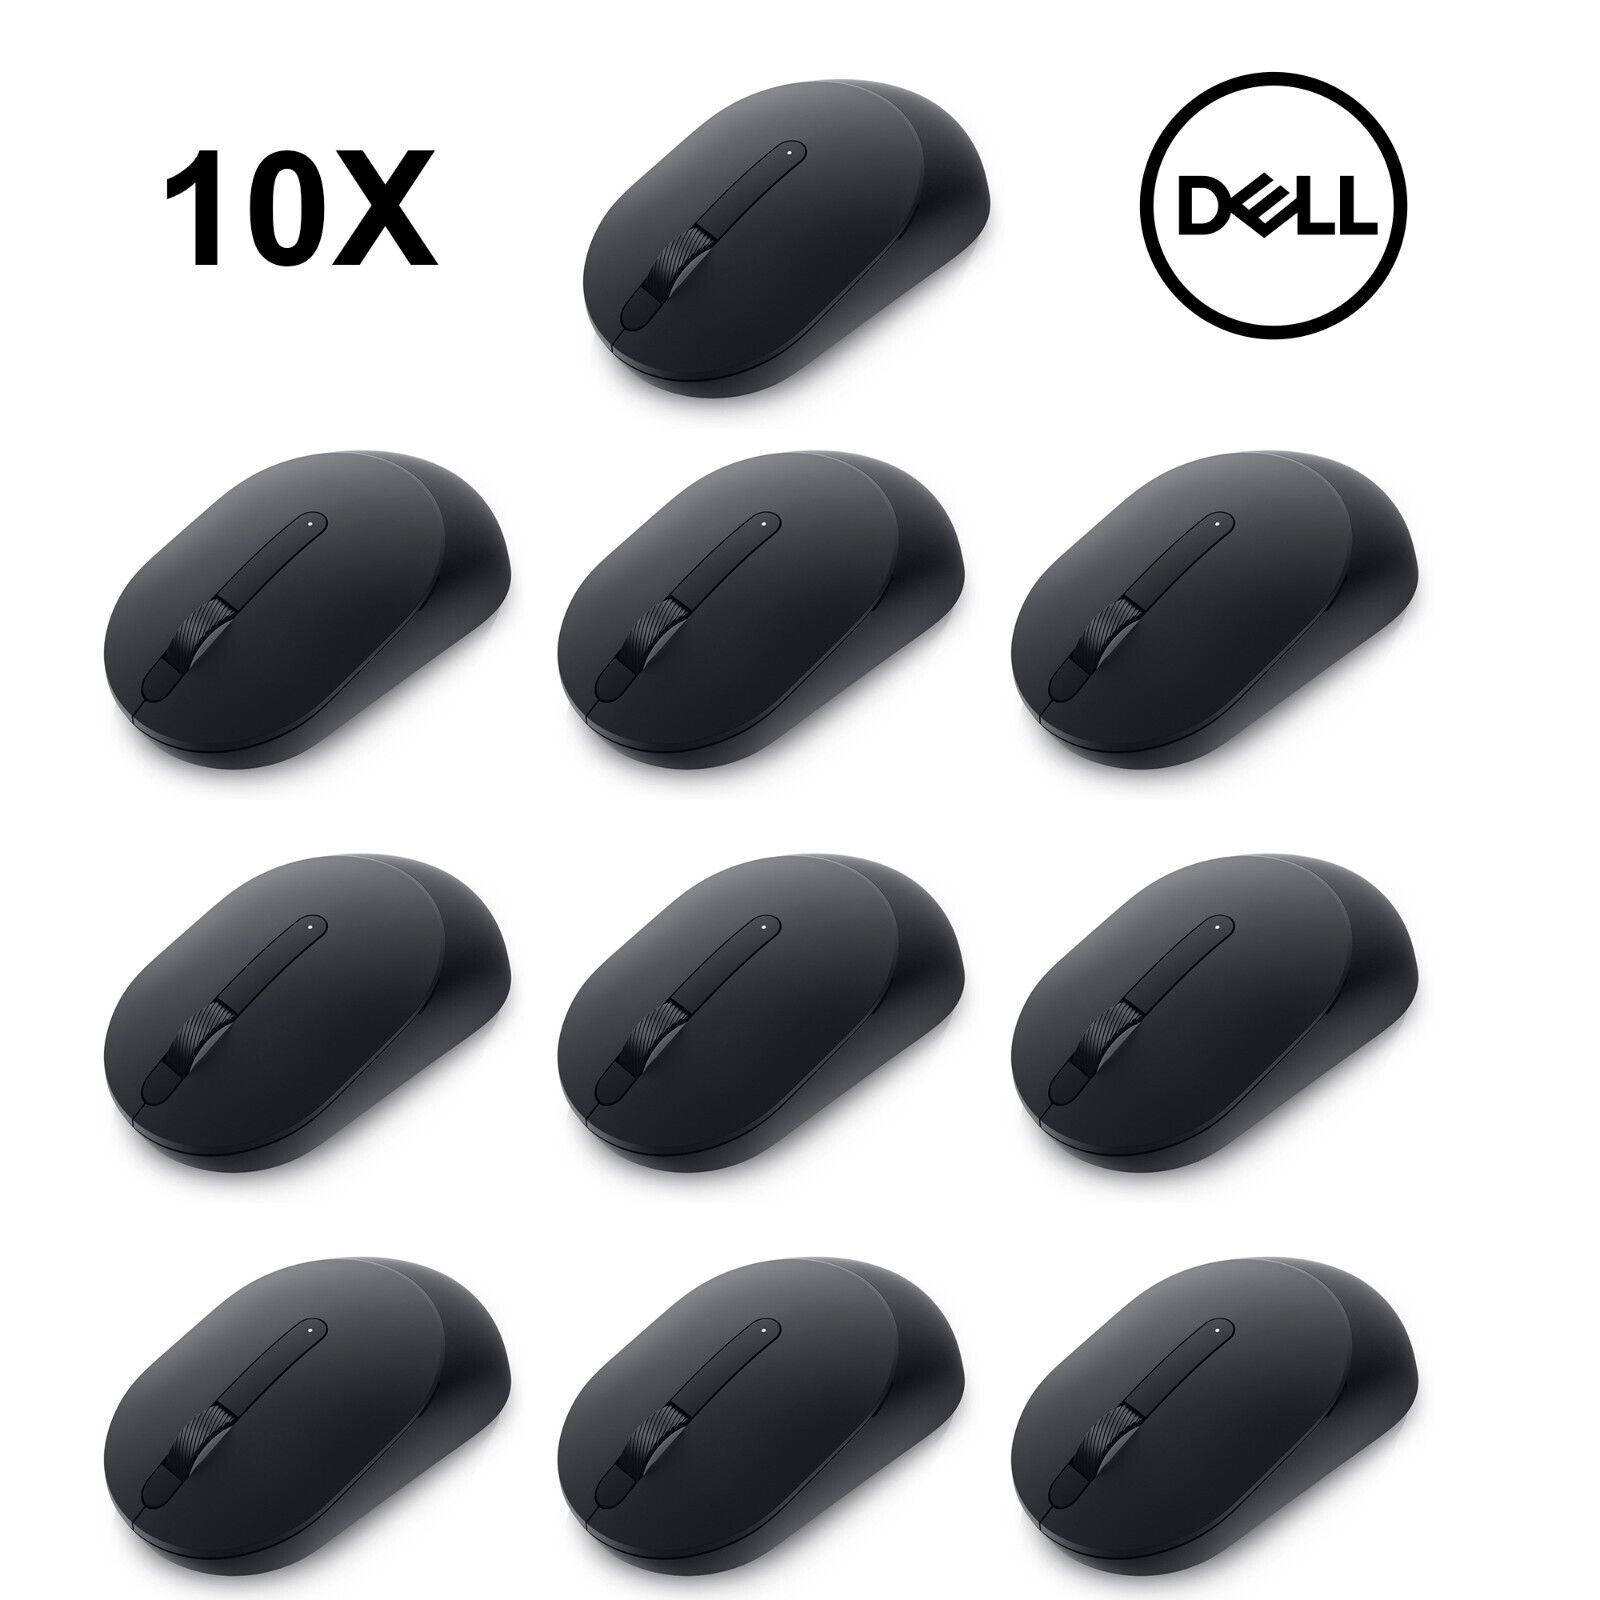 Lot of 10 Genuine Dell MS300 Series Wireless Mouse for PC Laptop up to 4000 DPI